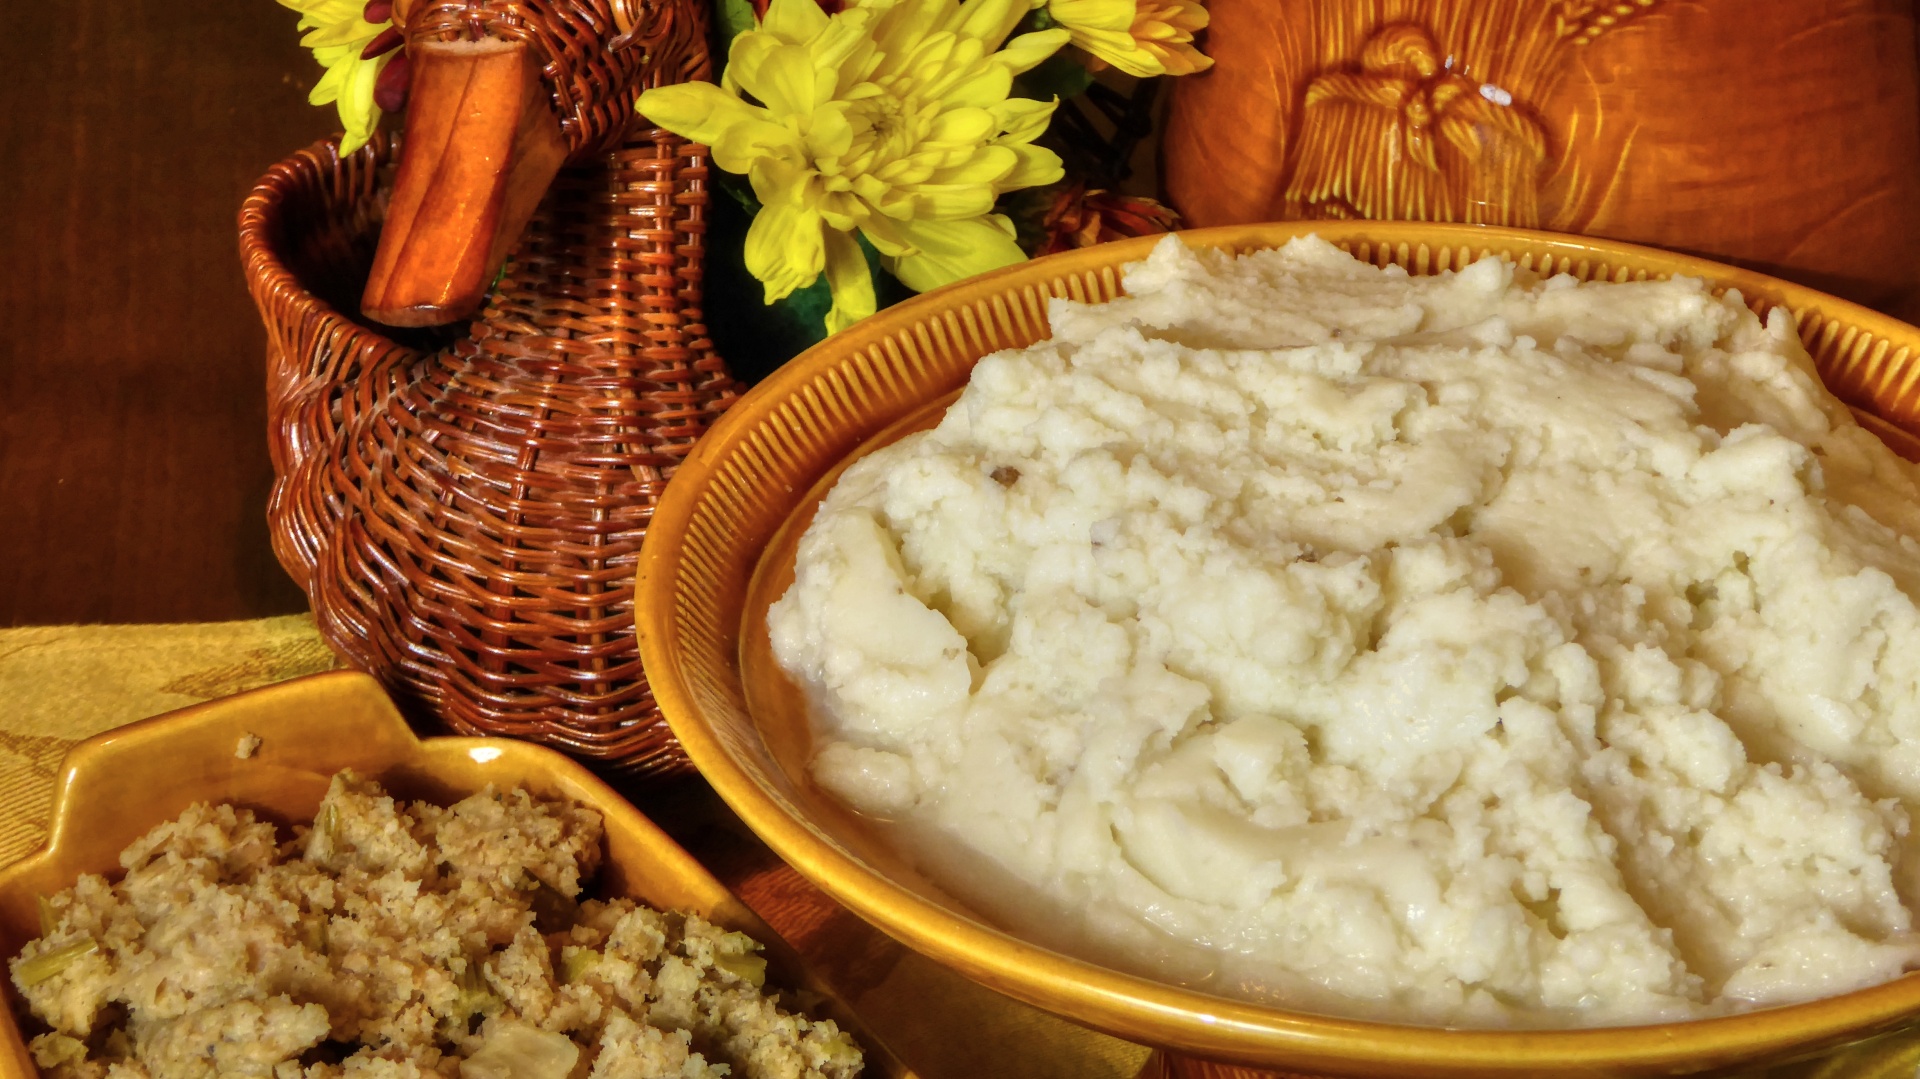 Creamy Mashed Potatoes with Chives